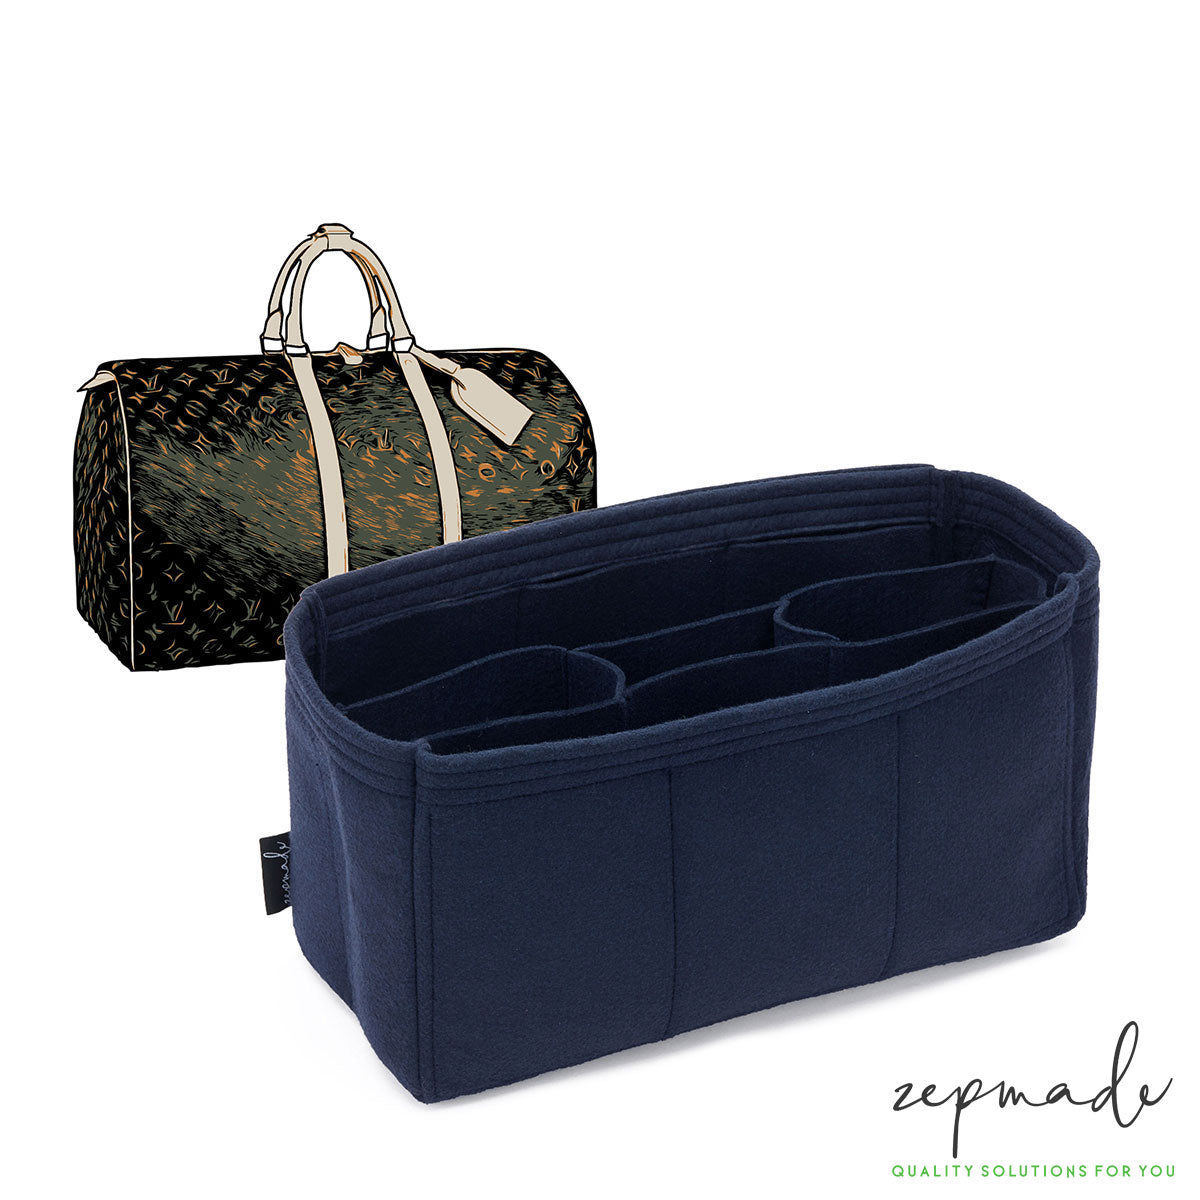 [Keepall 60 Organizer] Felt Purse Insert with Middle Zip Pouch, Customized  Tote Organize, Bag in Handbag (Style B)